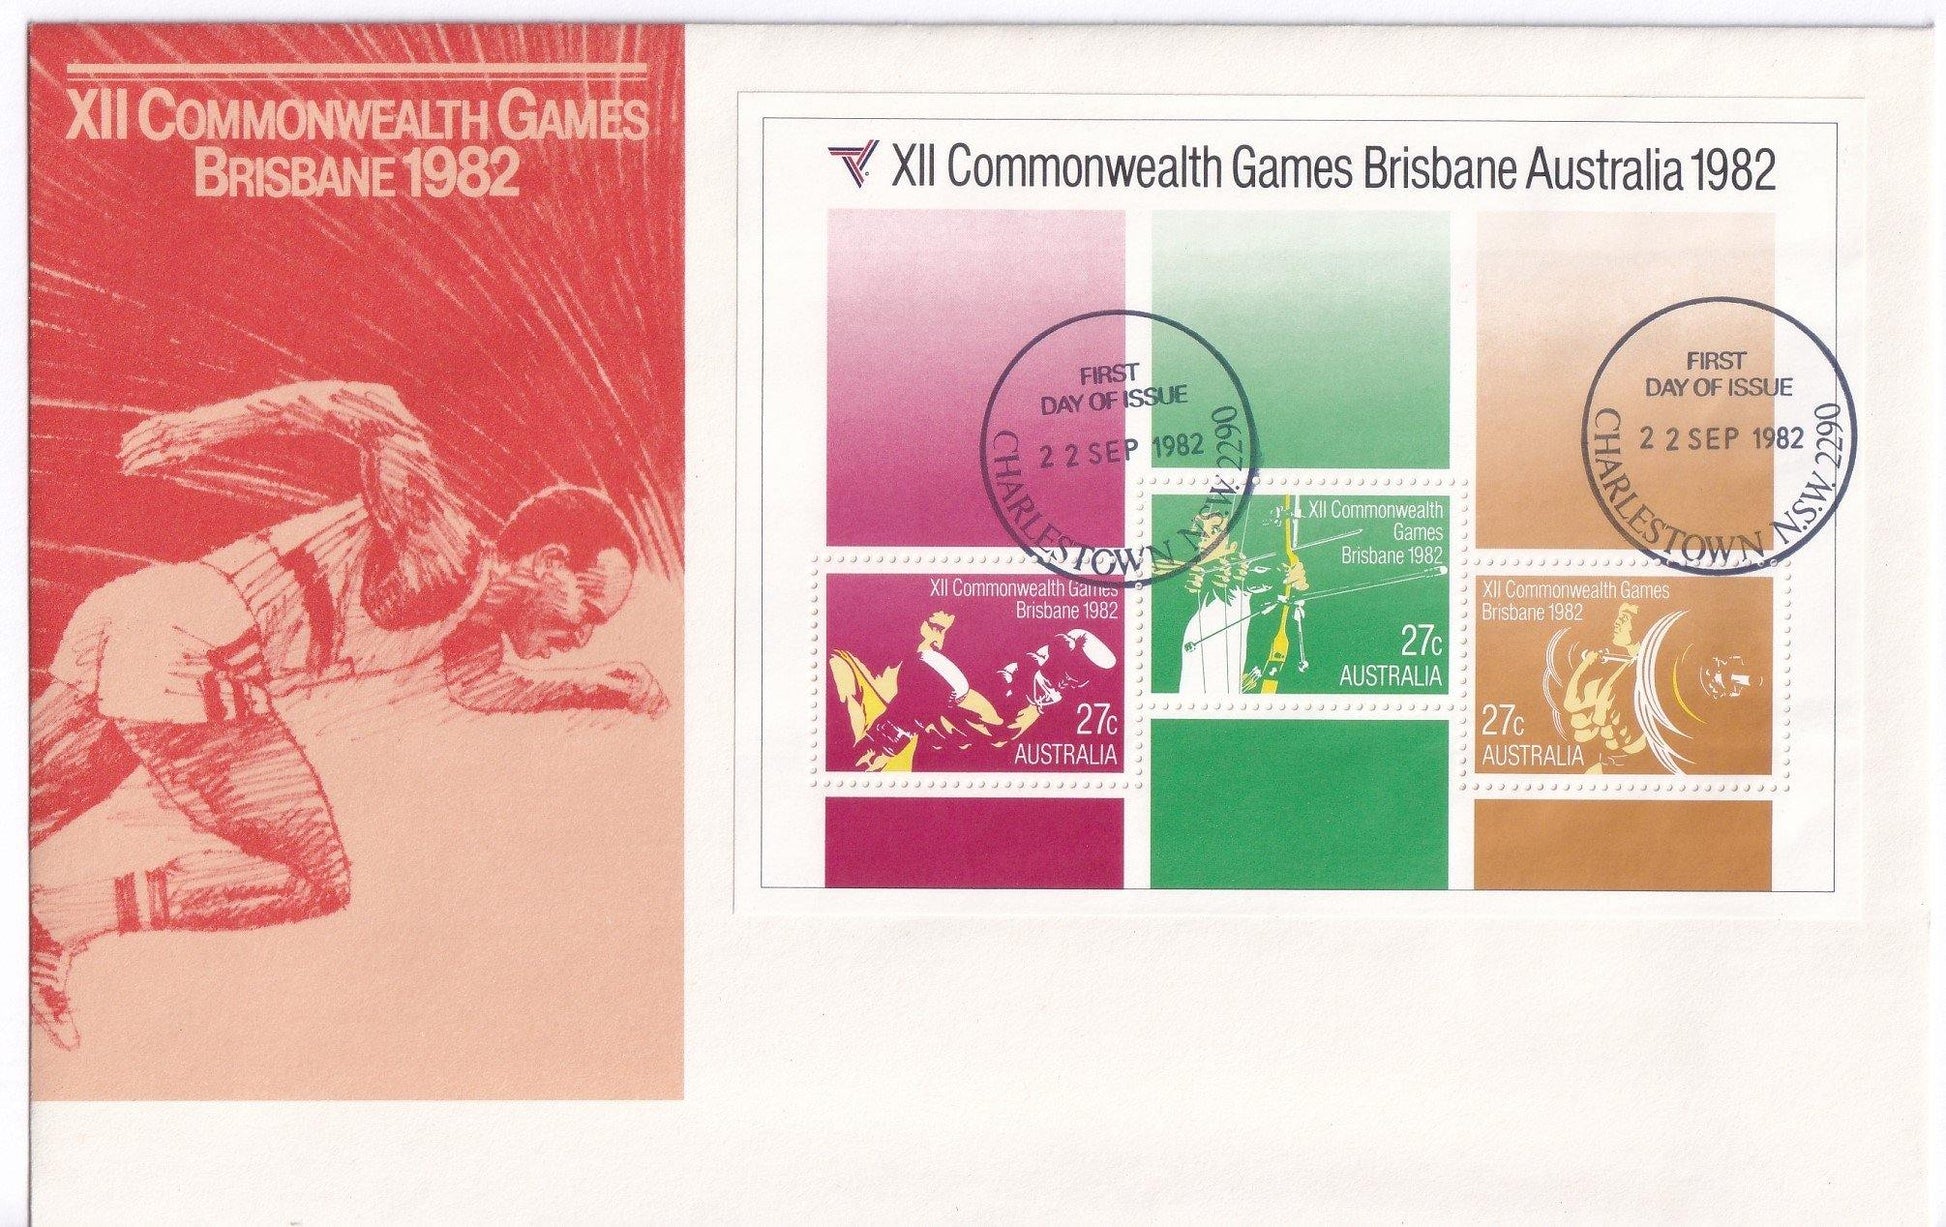 1982 Australian First Day Cover - XII Commonwealth Games, Brisbane Australia - Loose Change Coins